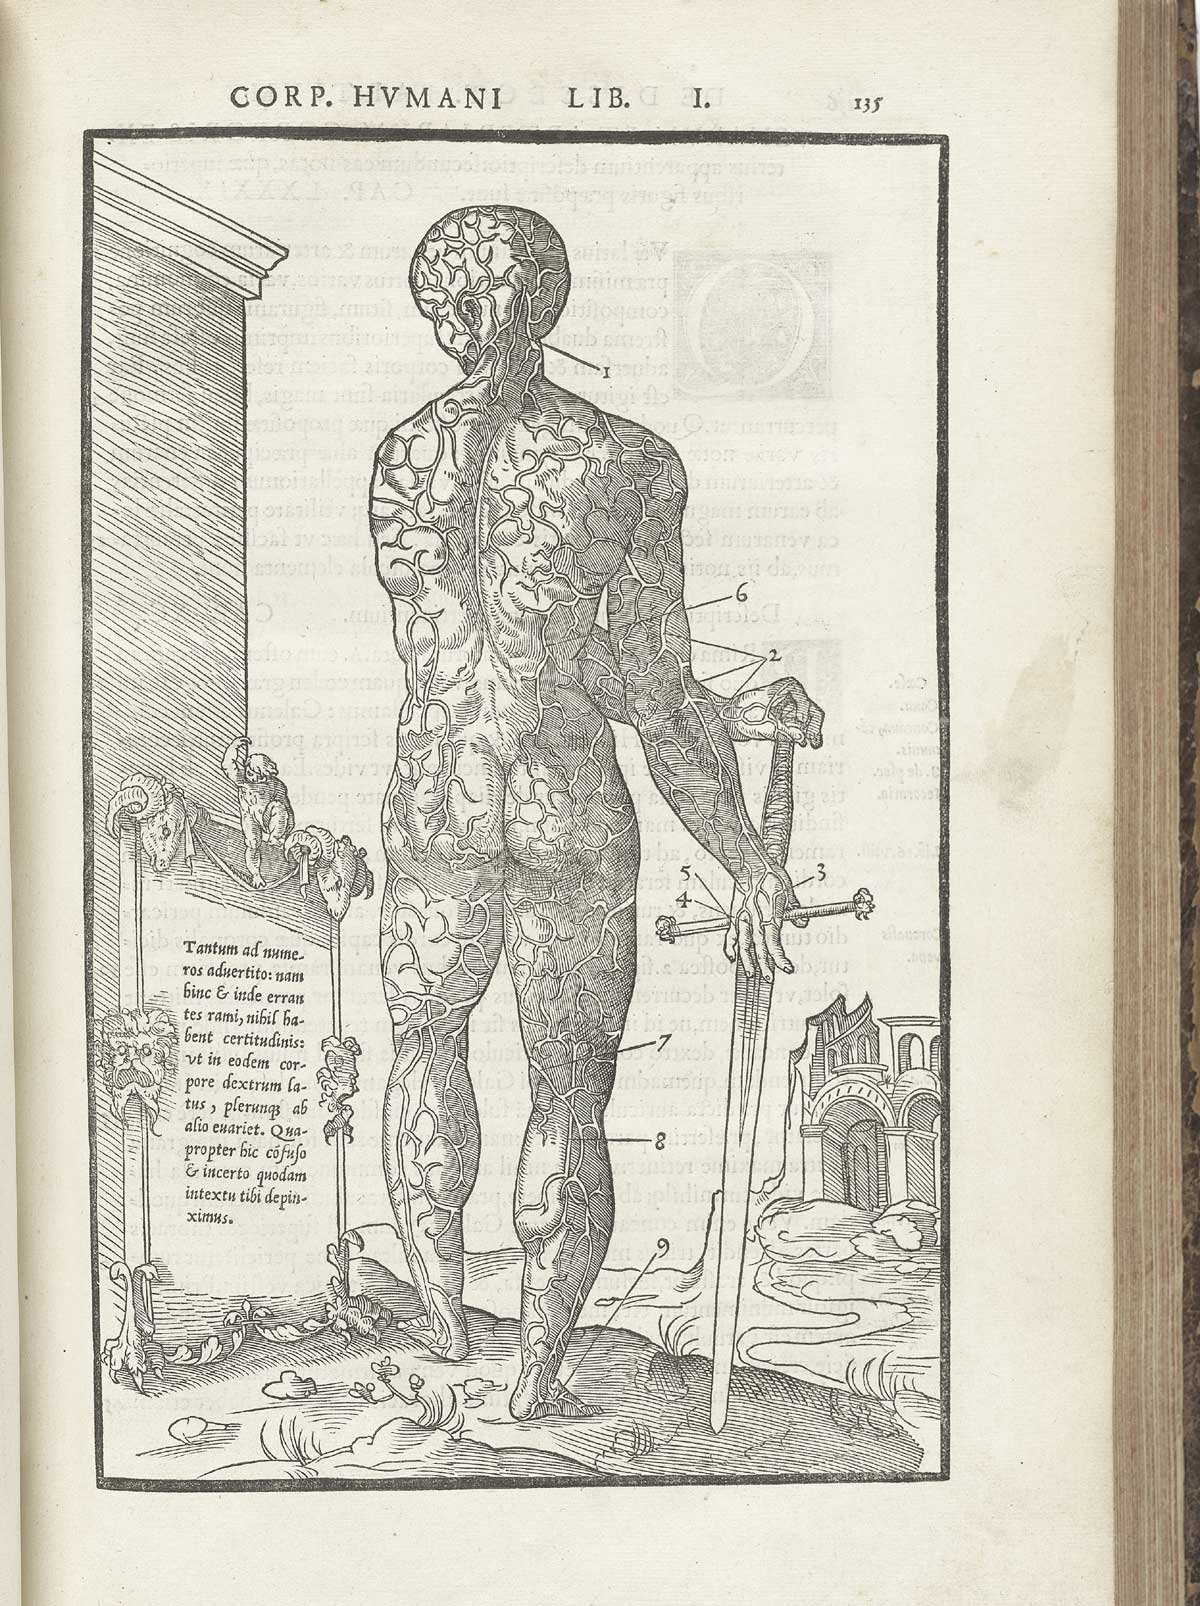 Woodcut venous figure standing on a marble column base in a pastoral setting, with his back to the viewer holding a large sword whose tip is in the ground and hilt in right and left hands to the figure’s right; to the left is a marble stele with text in Latin describing the venous system which is exposed on the figure, including heart, liver and major veins and arteries throughout the body, with index numbers surrounding him pointing to numerous structures, from Charles Estienne’s De dissection partium corporis humani libri tres, NLM Call no.: WZ 240 E81dd 1545.